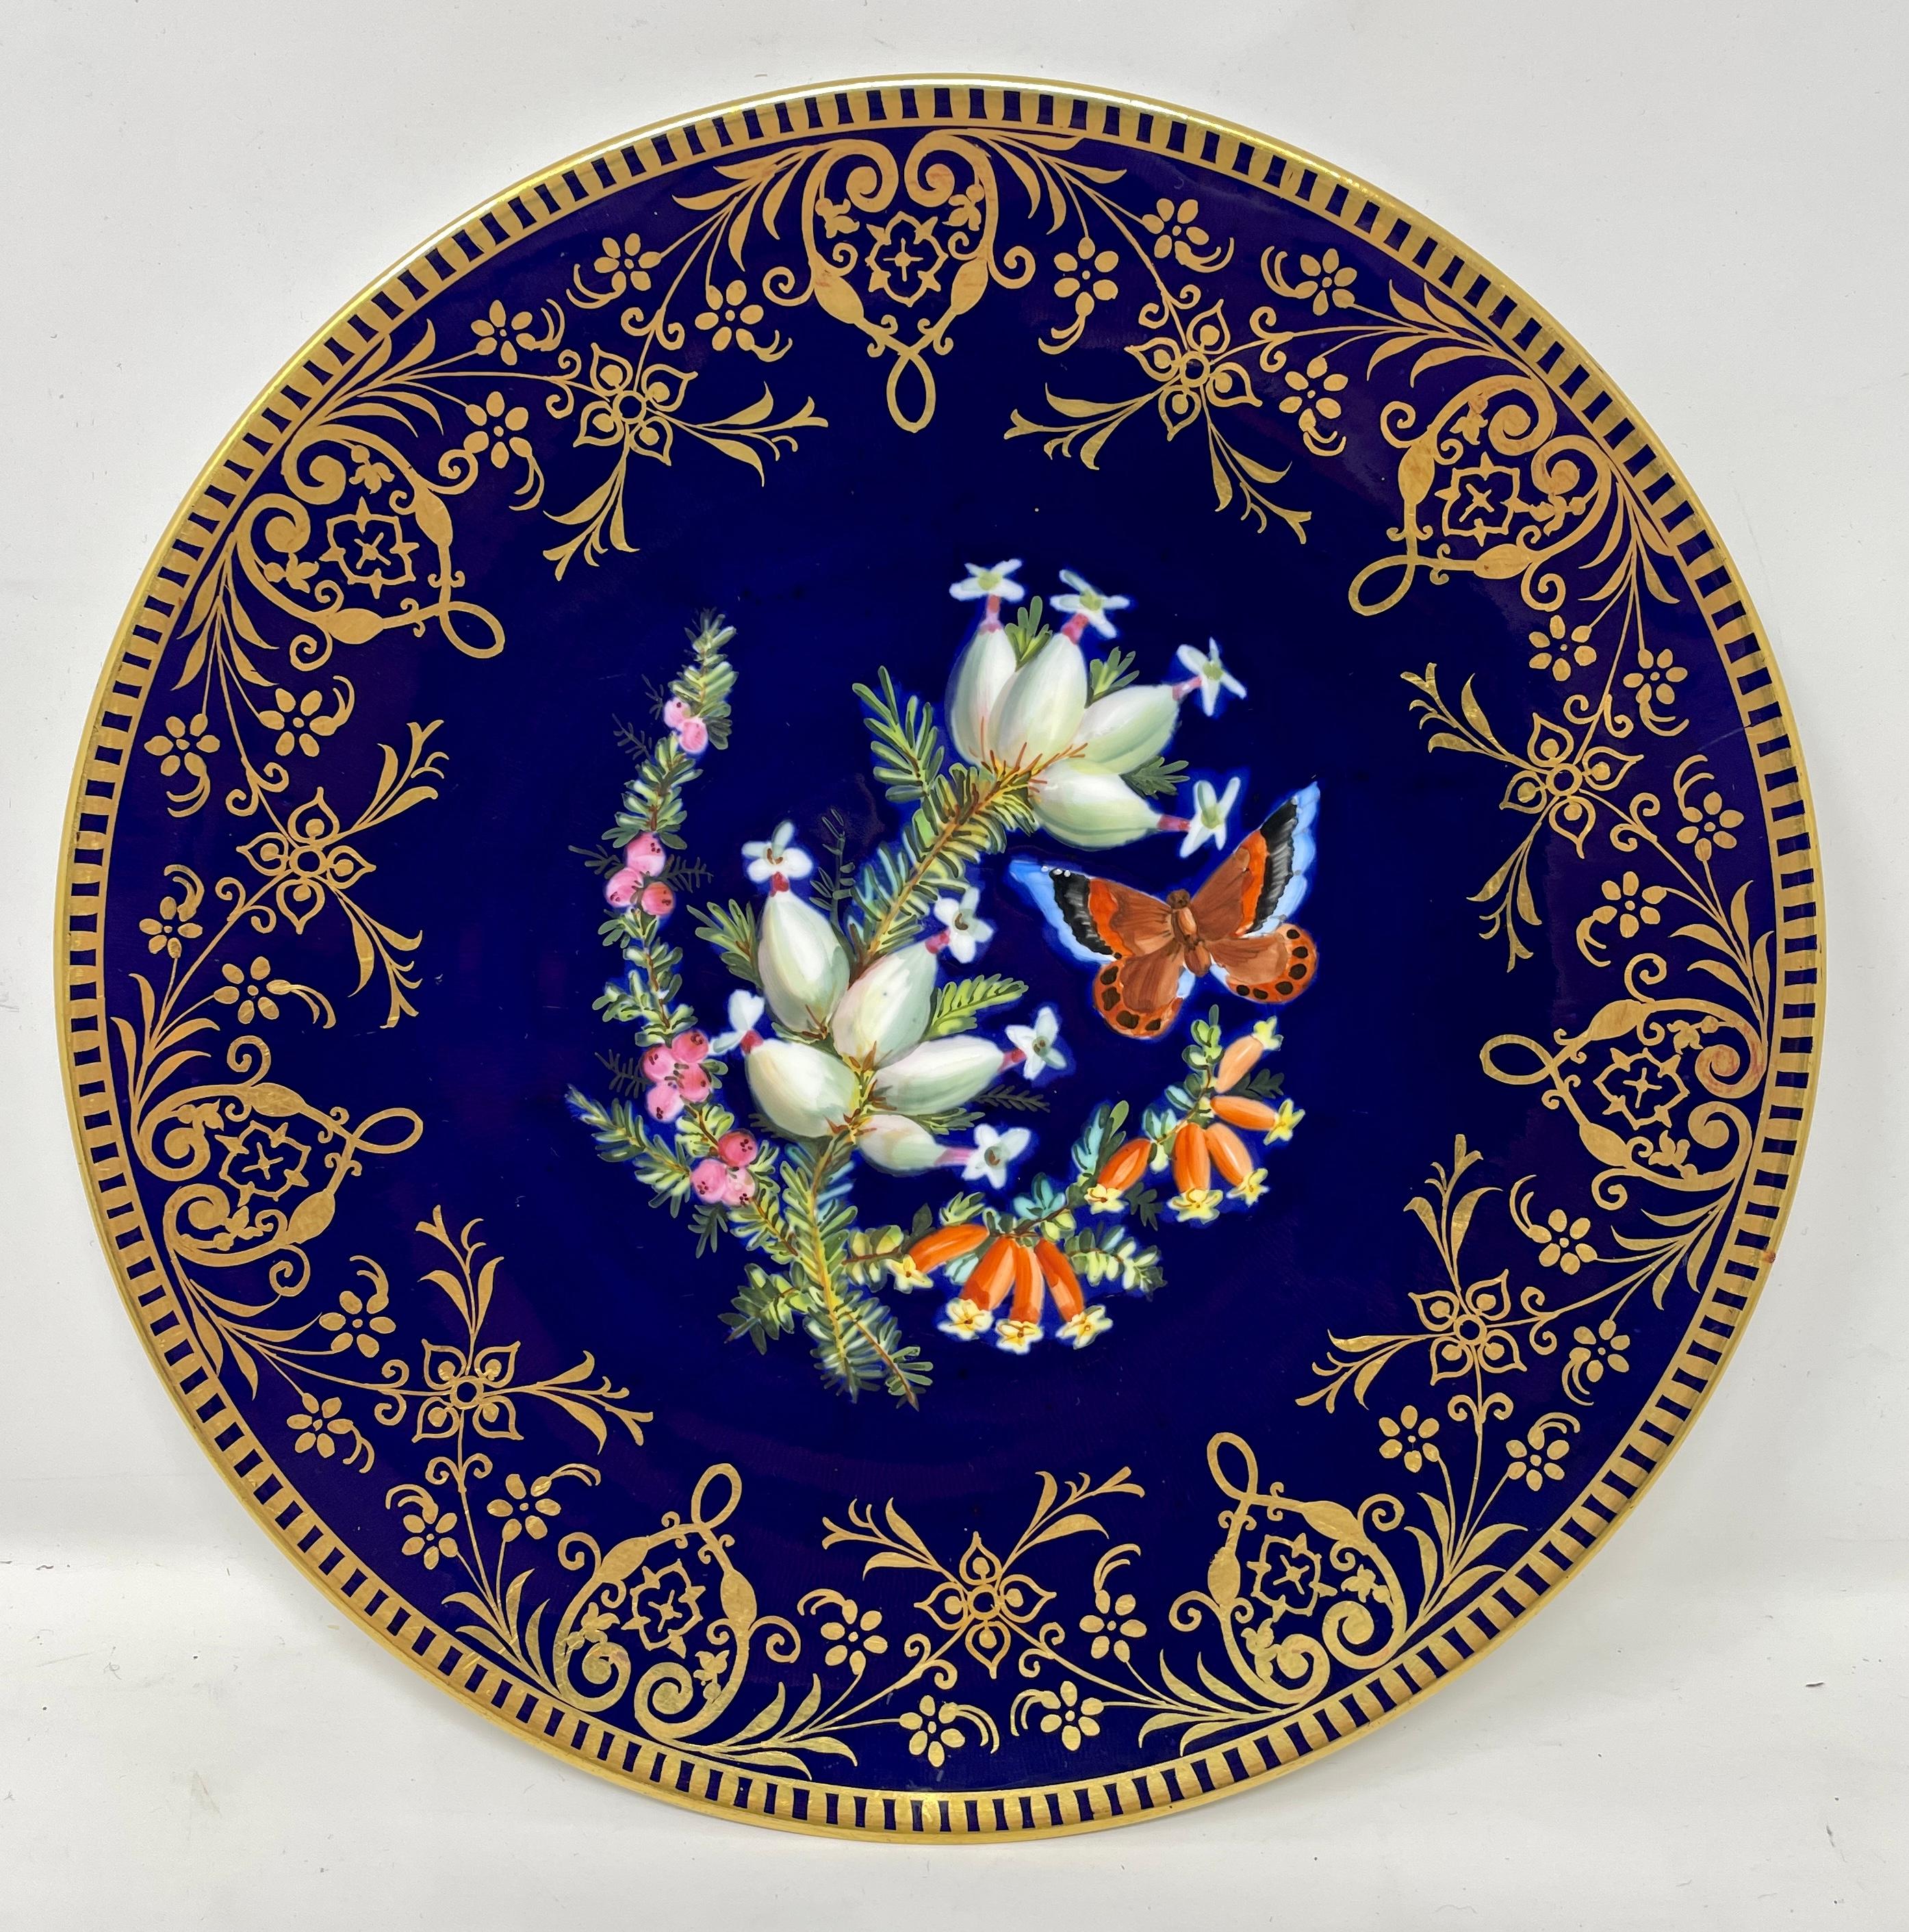 Set of 10 antique English hand-painted cobalt and gold floral dessert plates, circa 1870-1880.